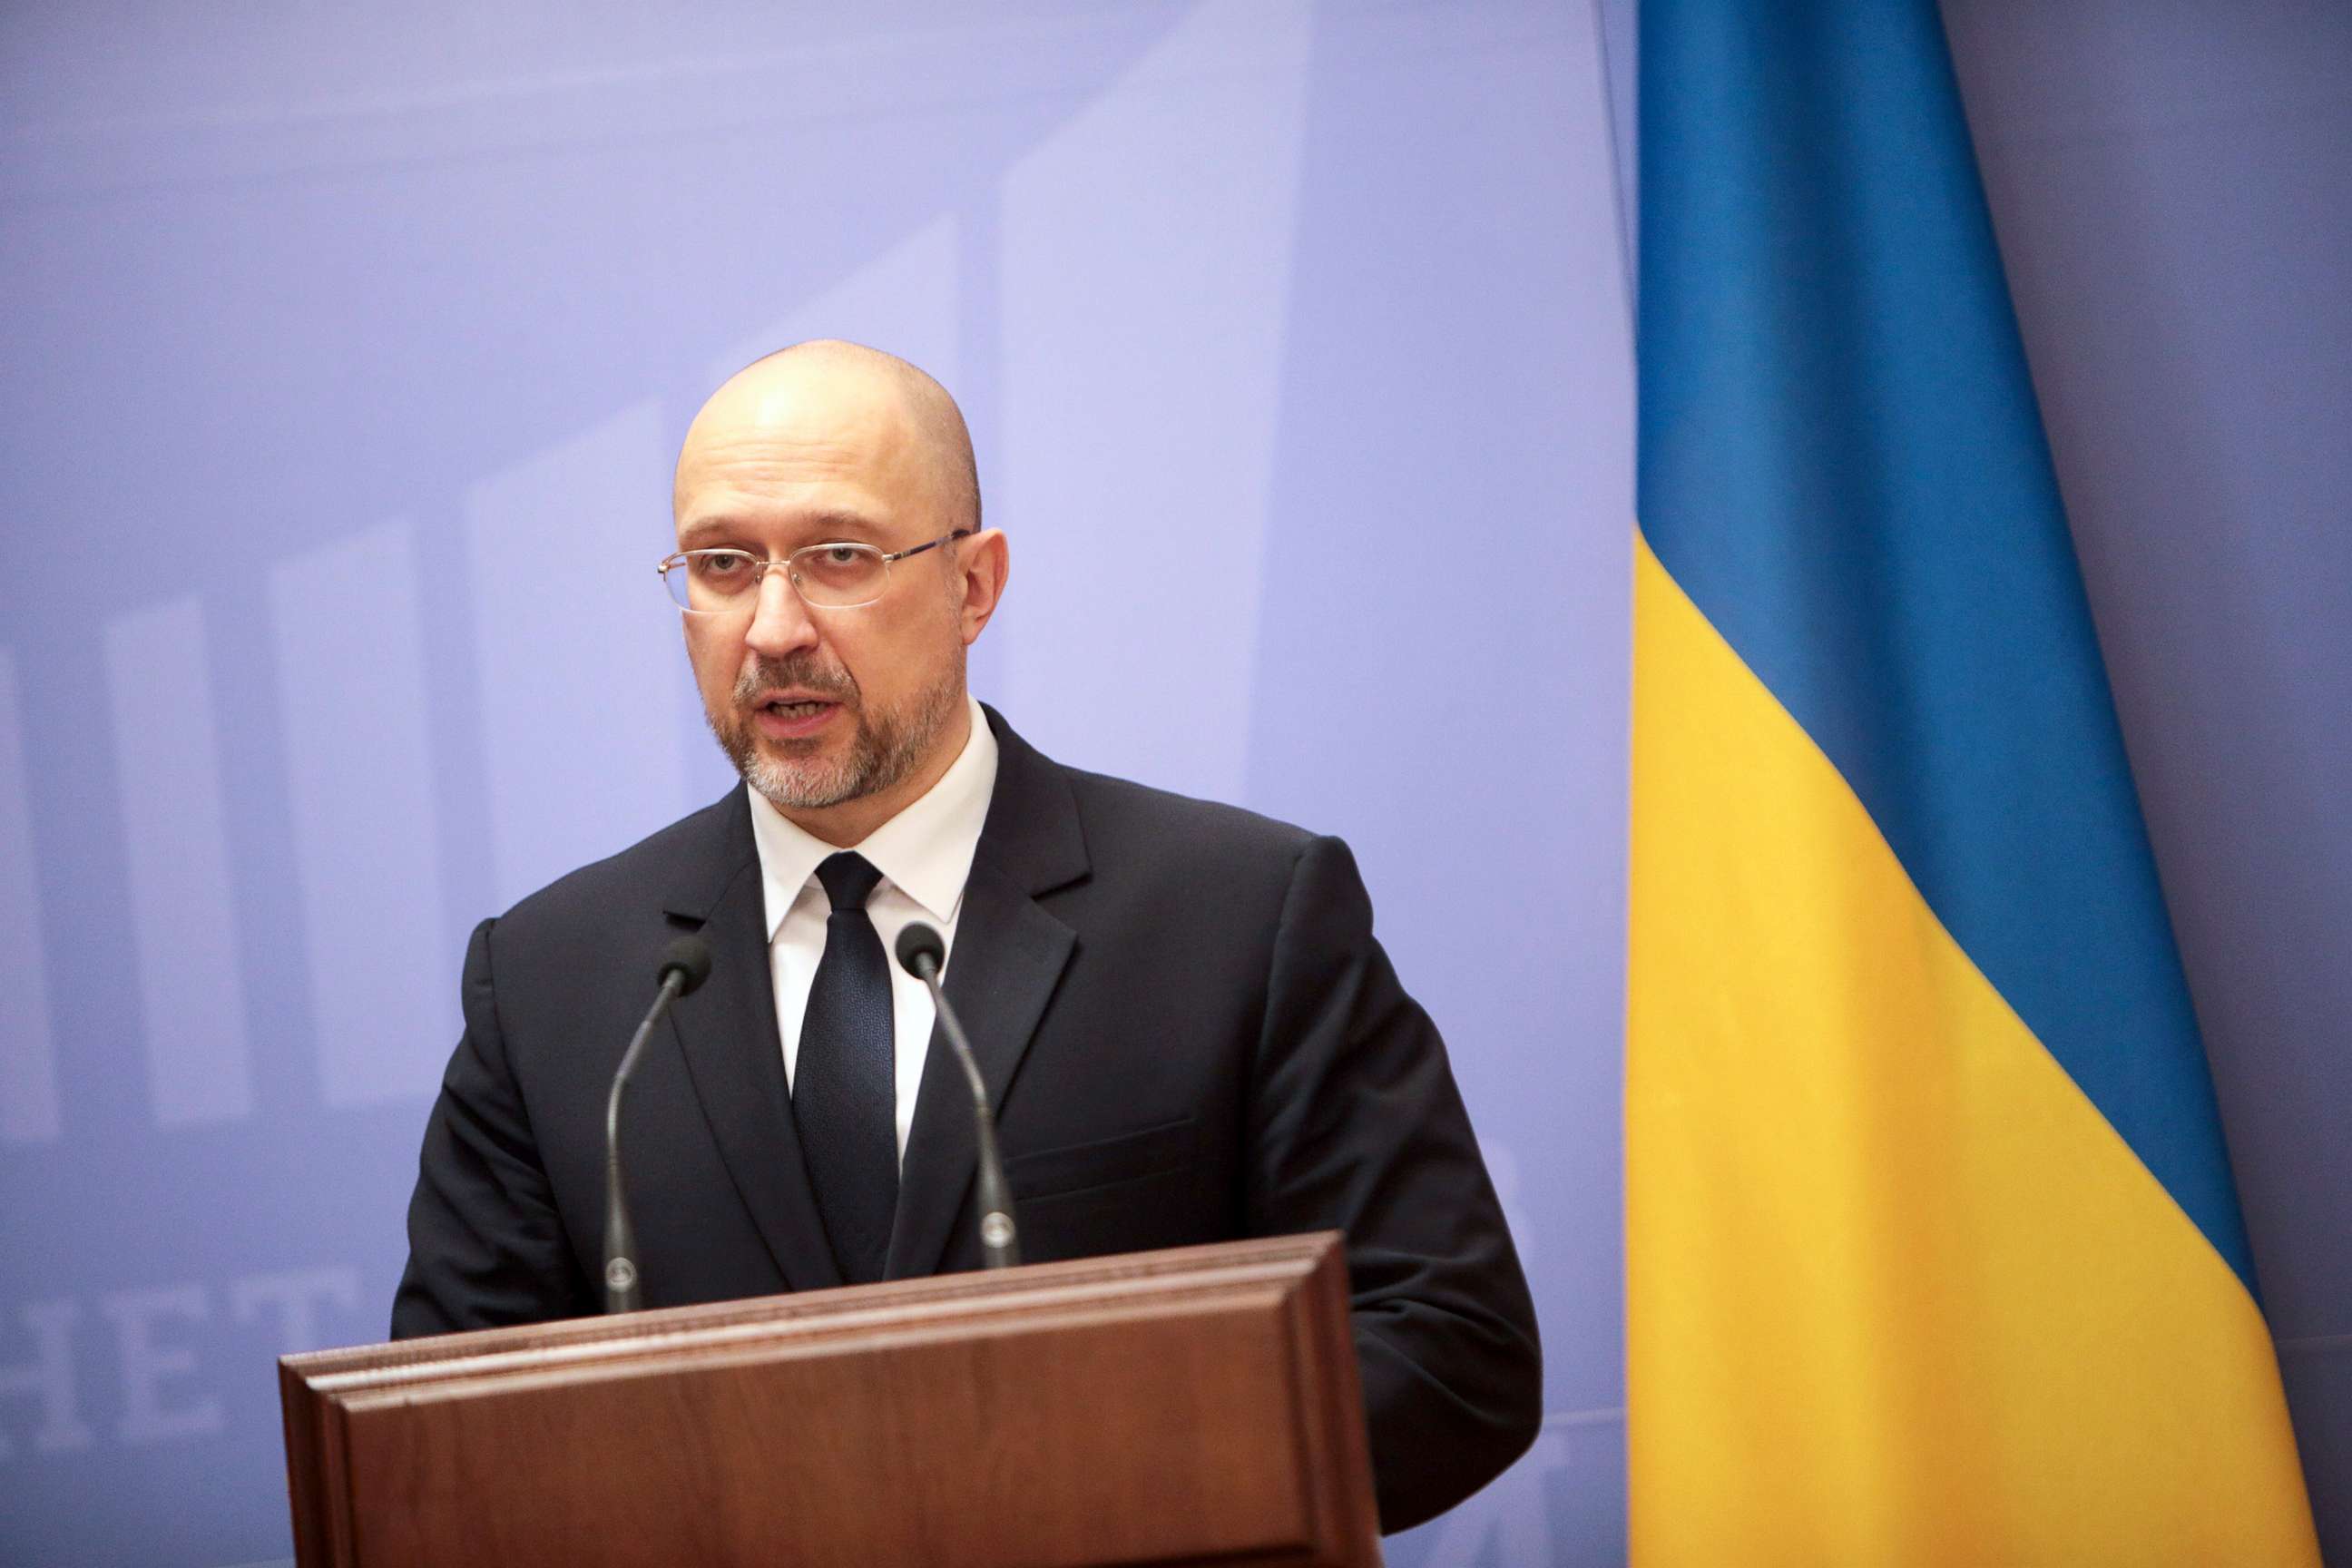 PHOTO: Prime Minister of Ukraine Denys Shmyhal is pictured during a joint briefing with Executive Vice-President of the European Commission Valdis Dombrovskis in Kyiv, Ukraine, Jan. 31, 2022. 